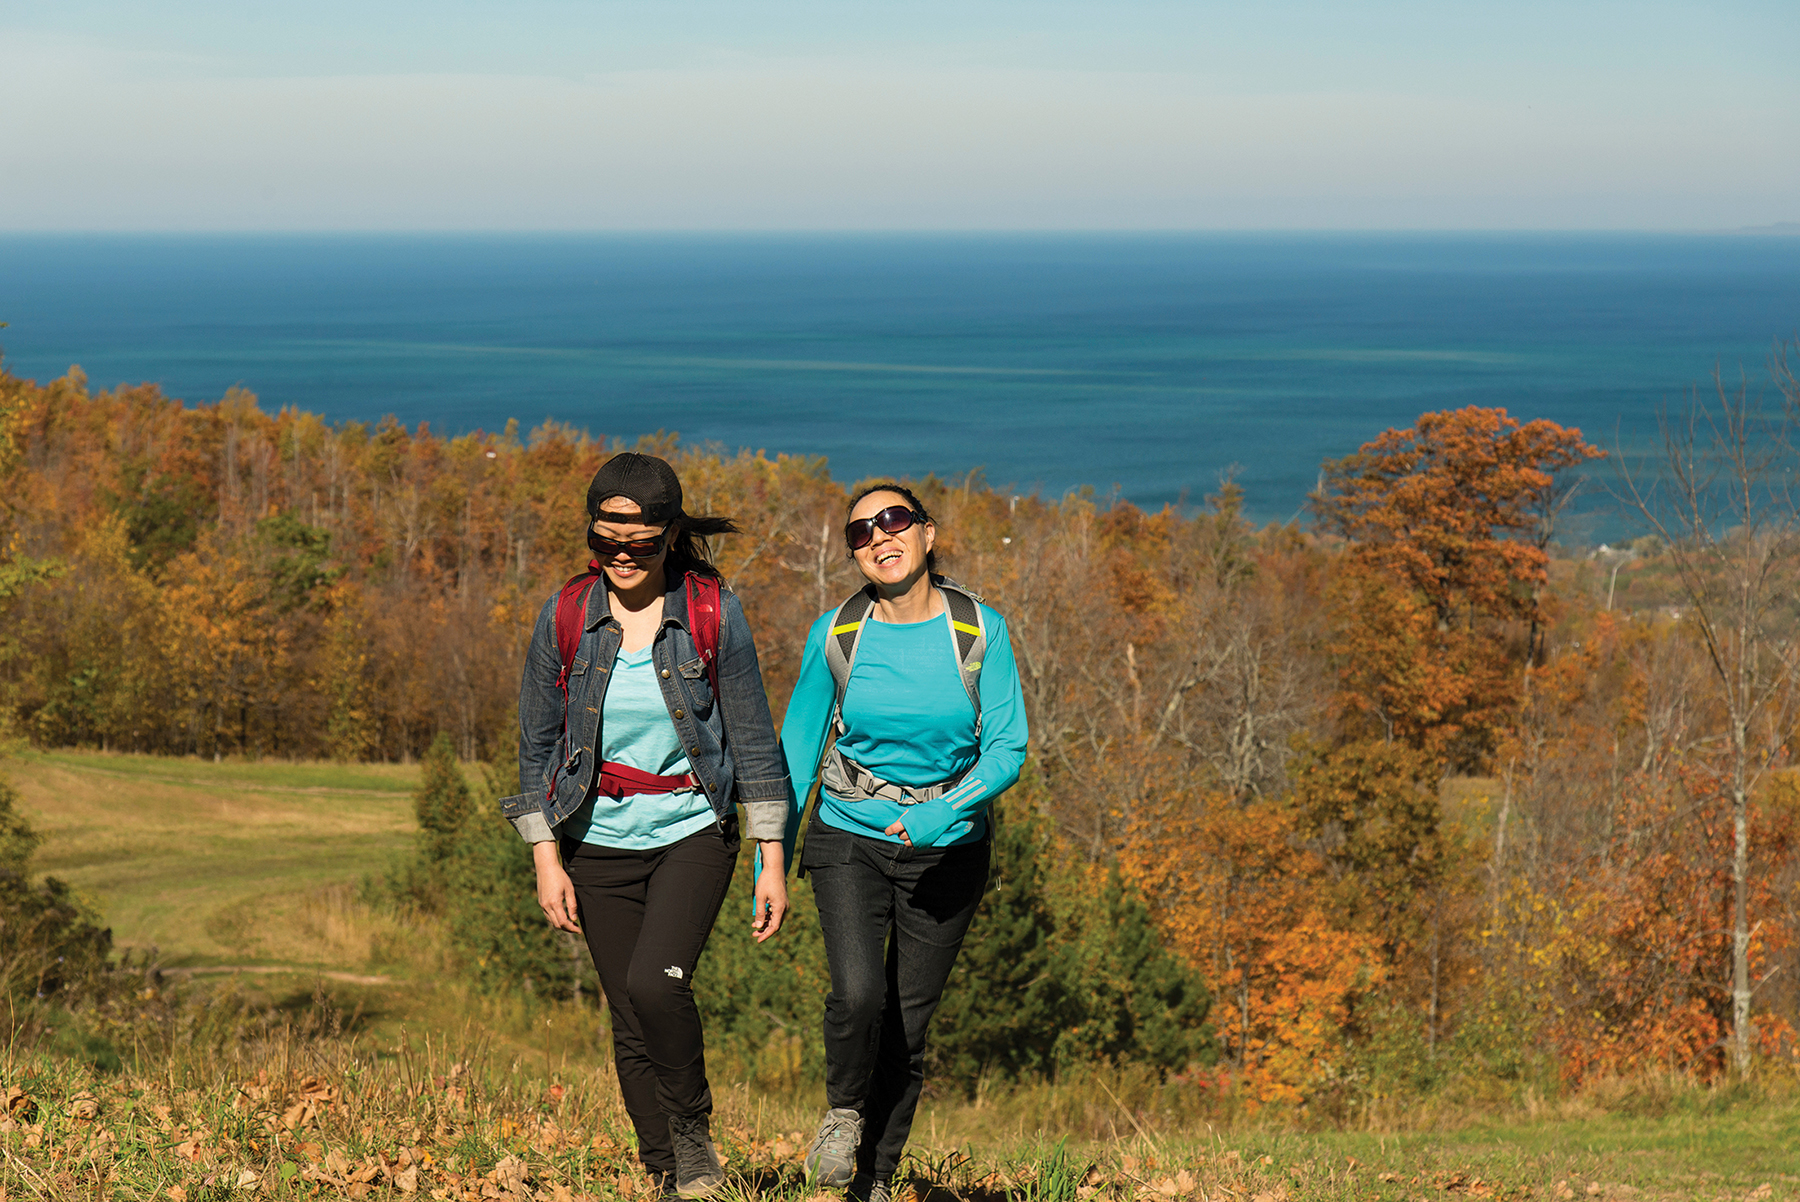 Hiking the Groove Trail along the top of the Escarpment at Blue Mountain Resort.